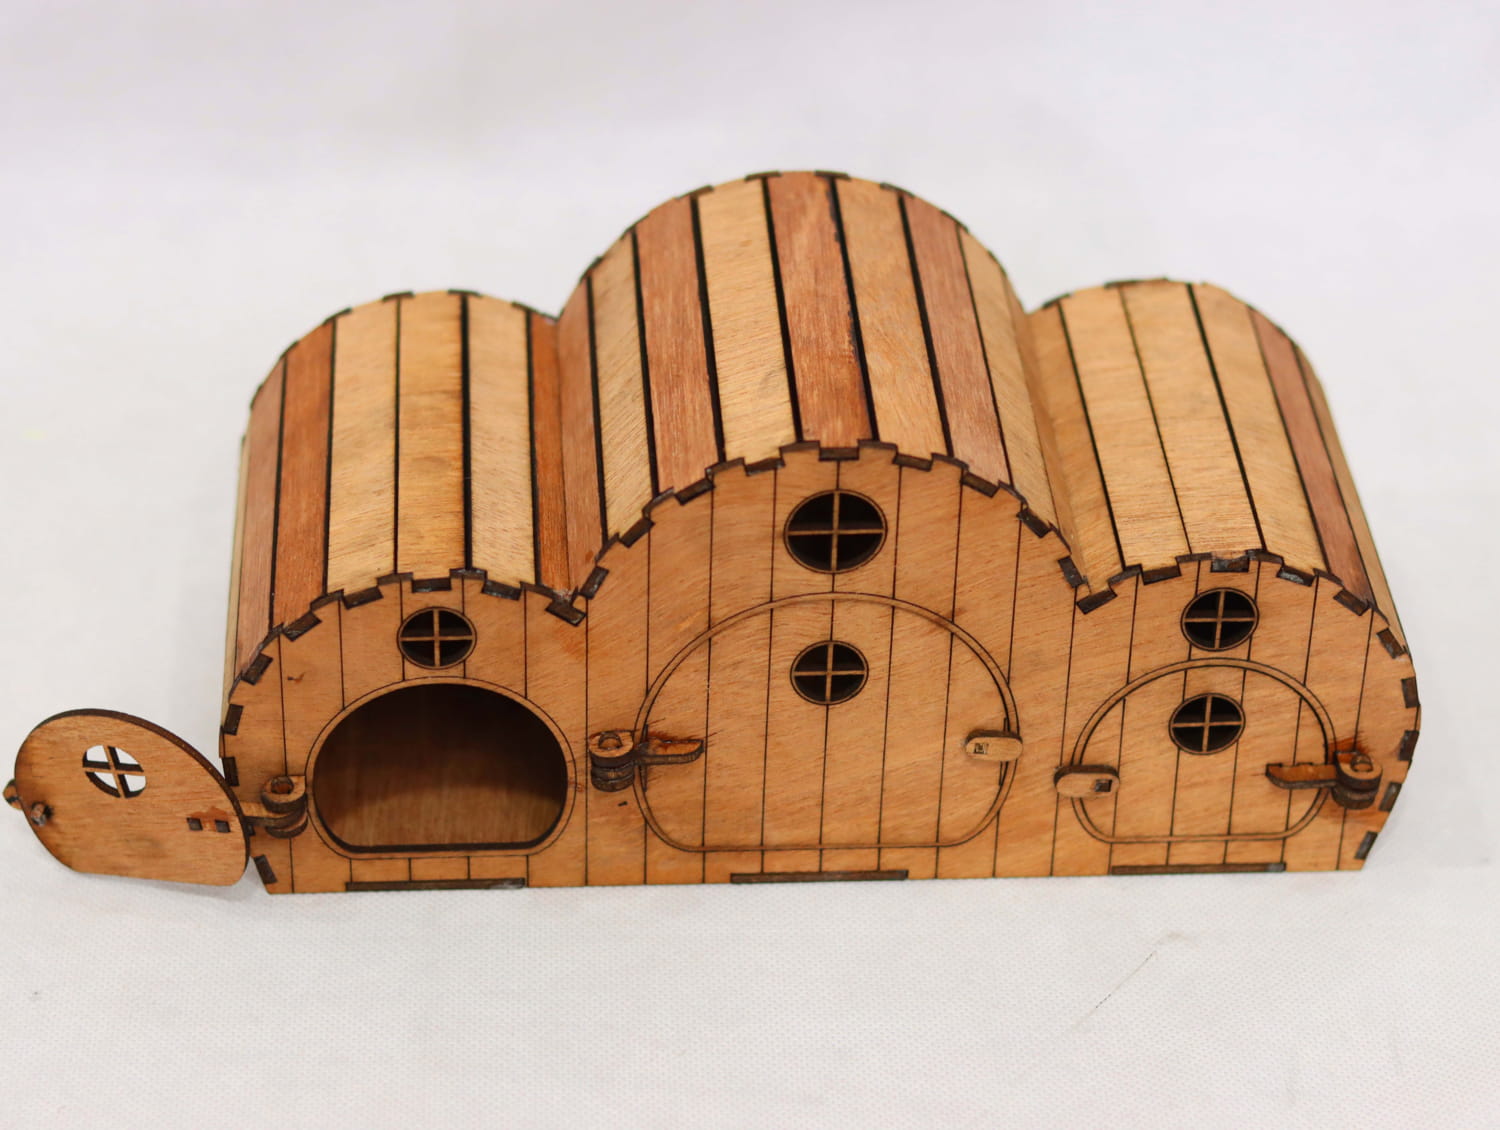 Laser Cut Wooden Hamster House 3mm Free Vector